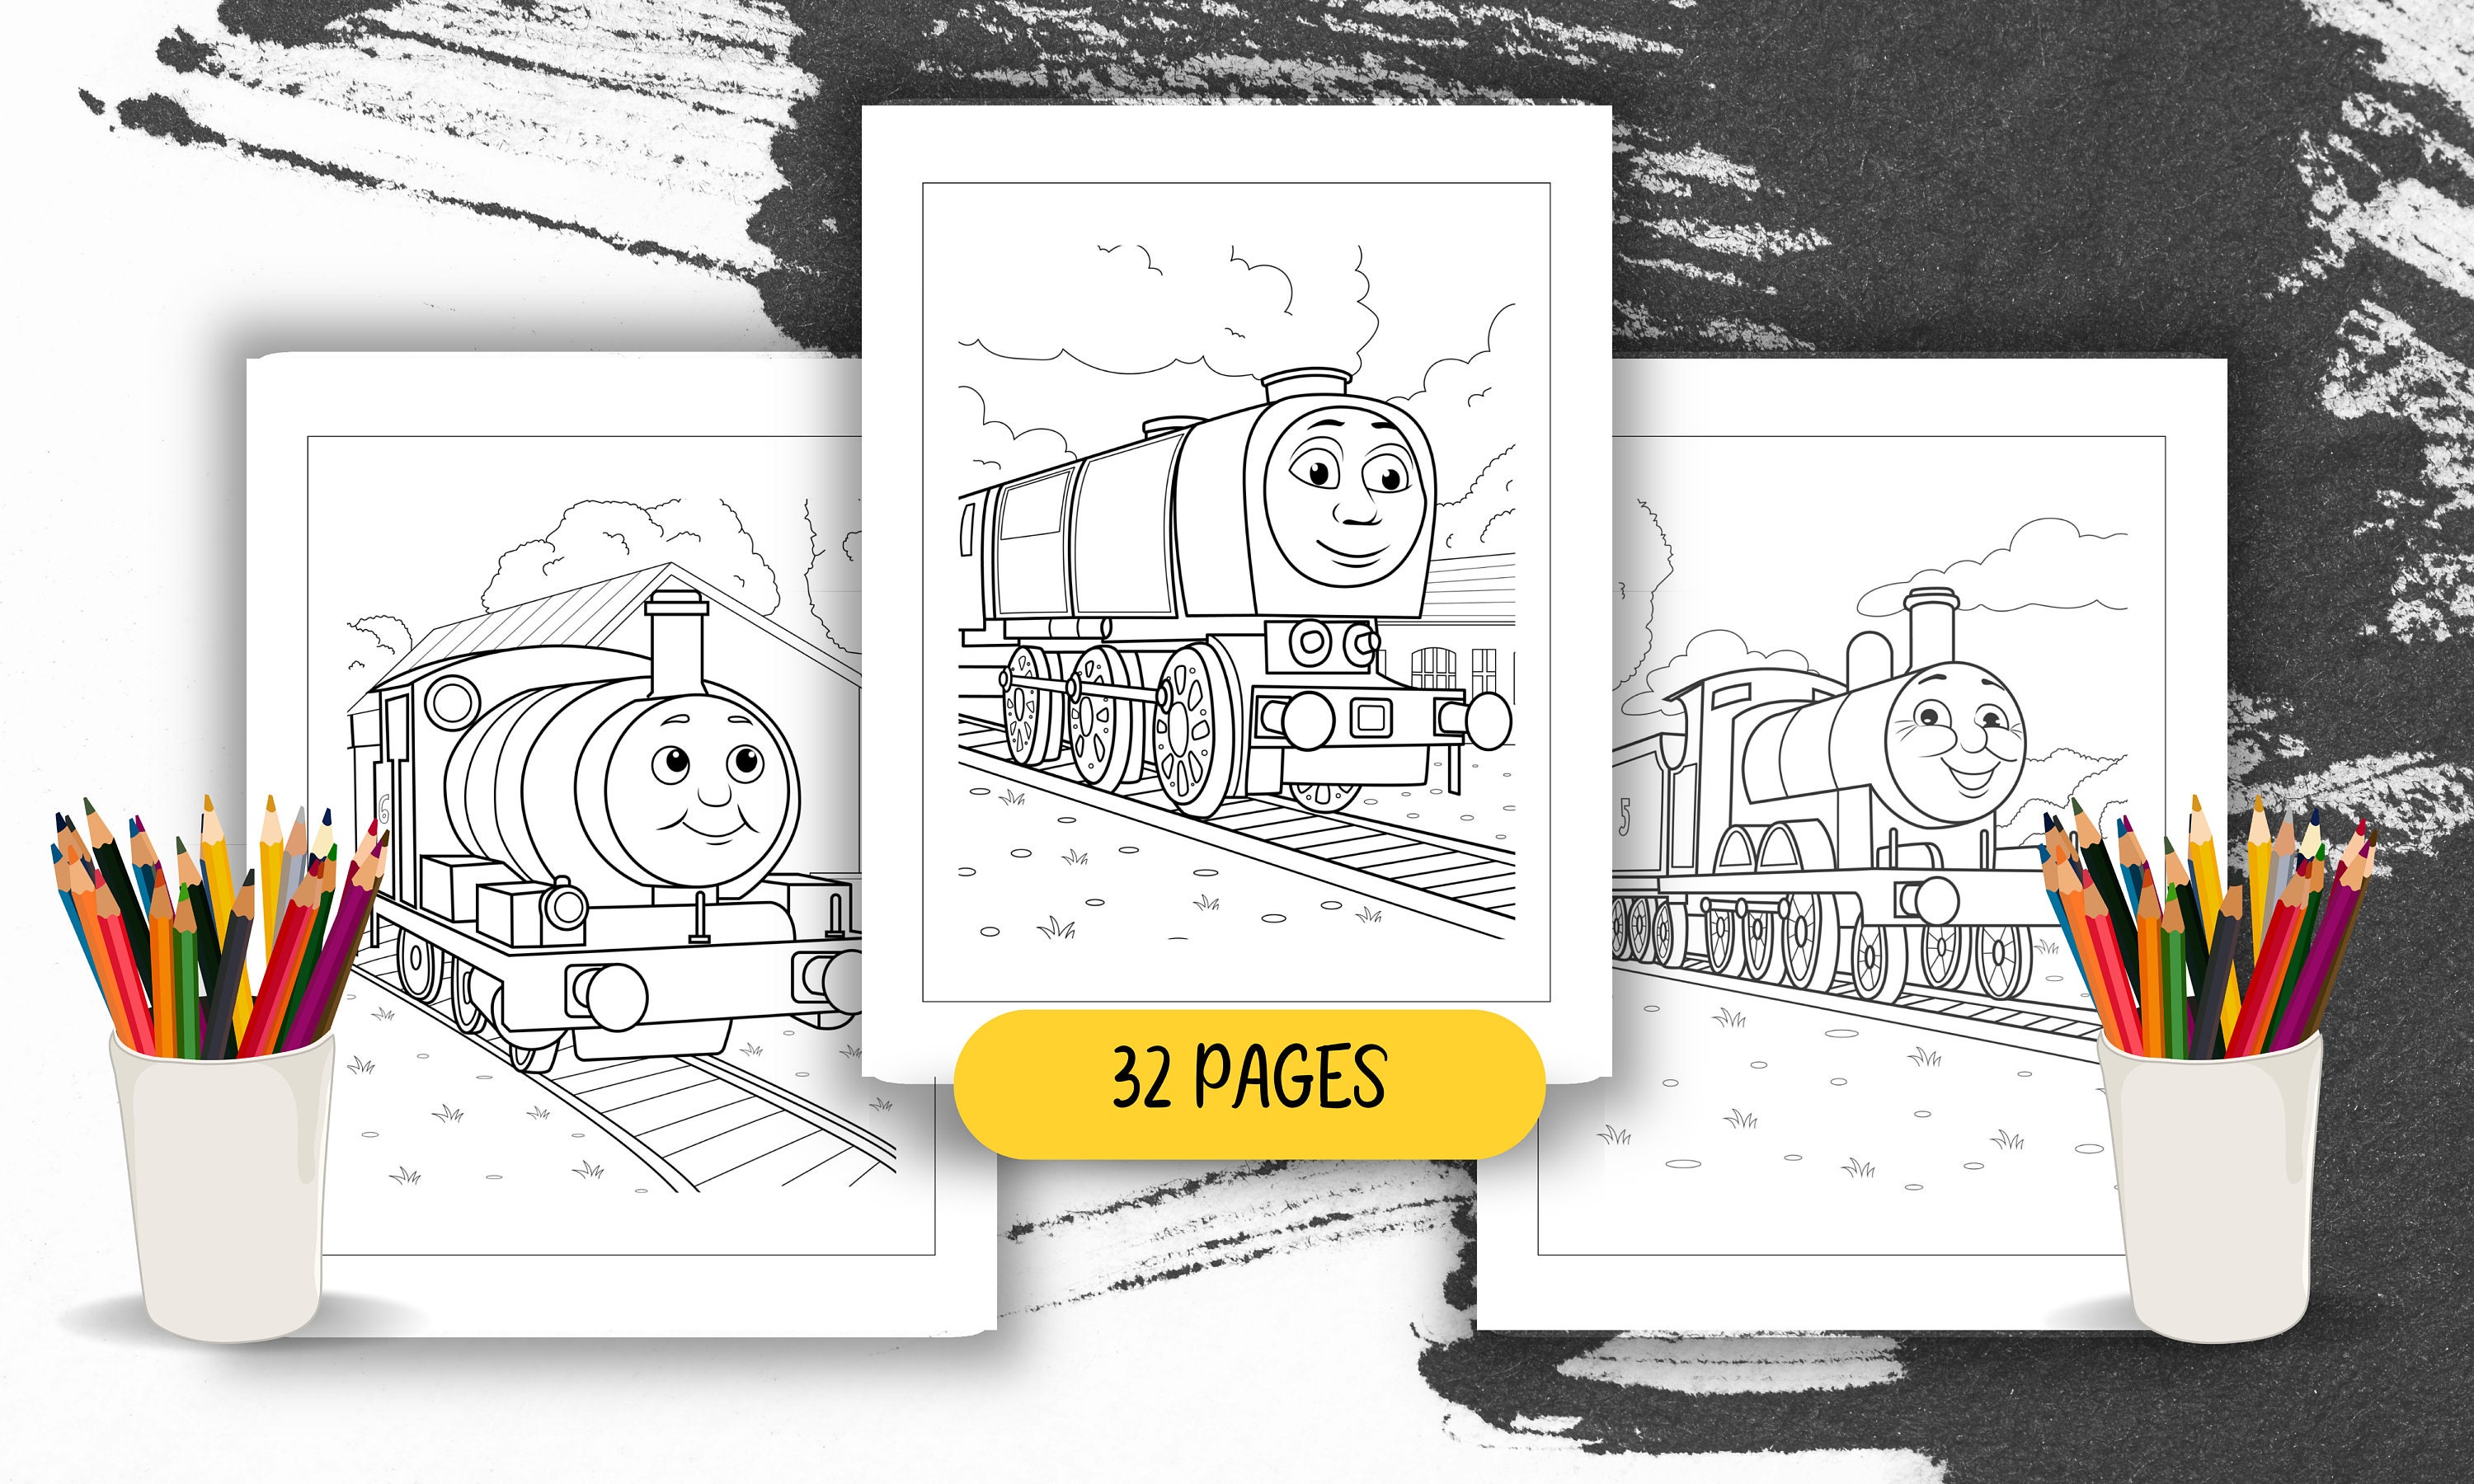 Thomas friends coloring book pages of fun train and creative activities for kids of all ages